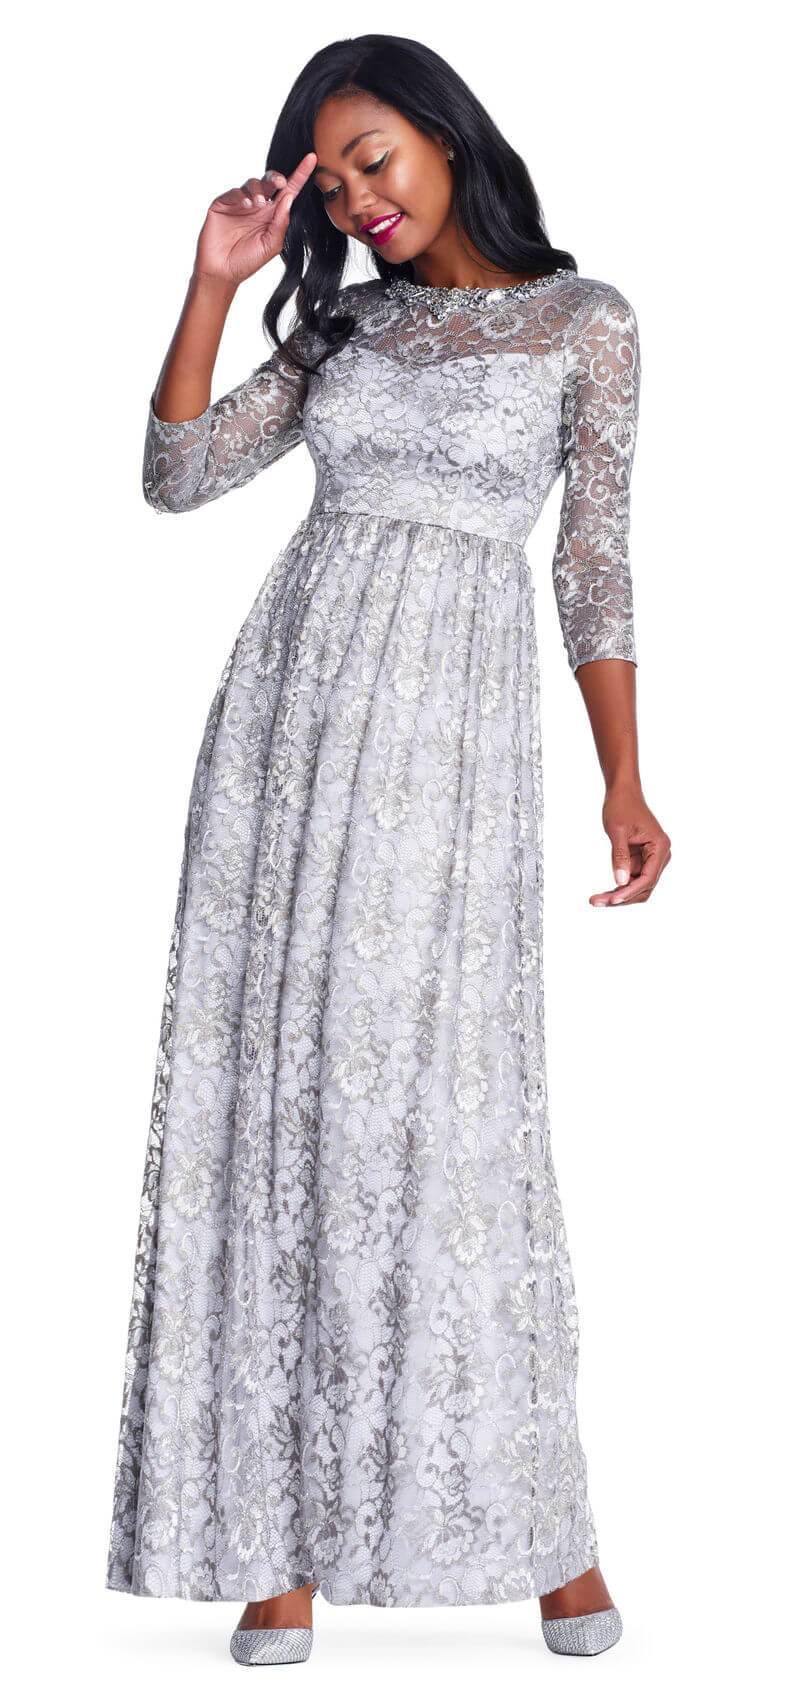 Adrianna Papell Long Formal Long Sleeve Party Dress - The Dress Outlet Adrianna Papell